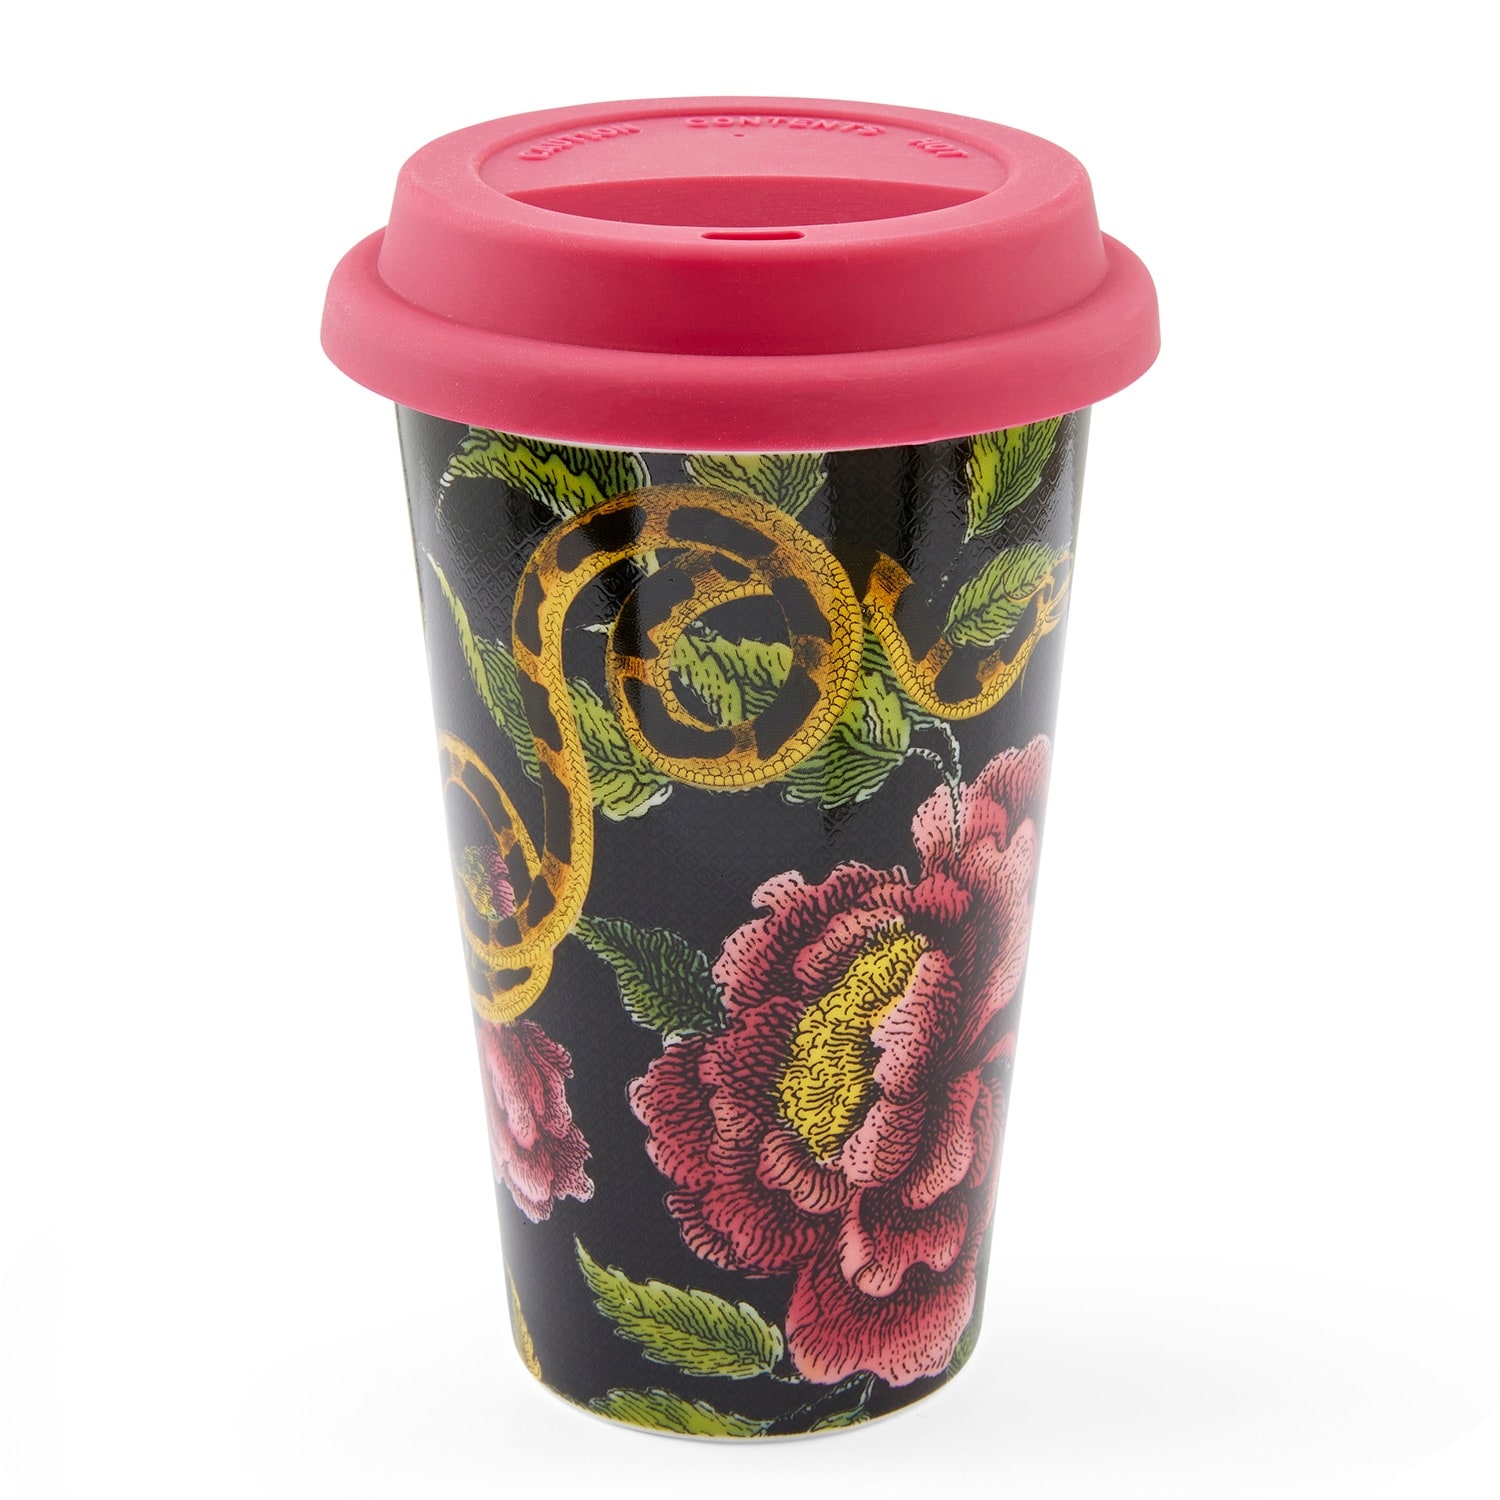 Spode Creatures of Curiosity Travel Mug with Lid